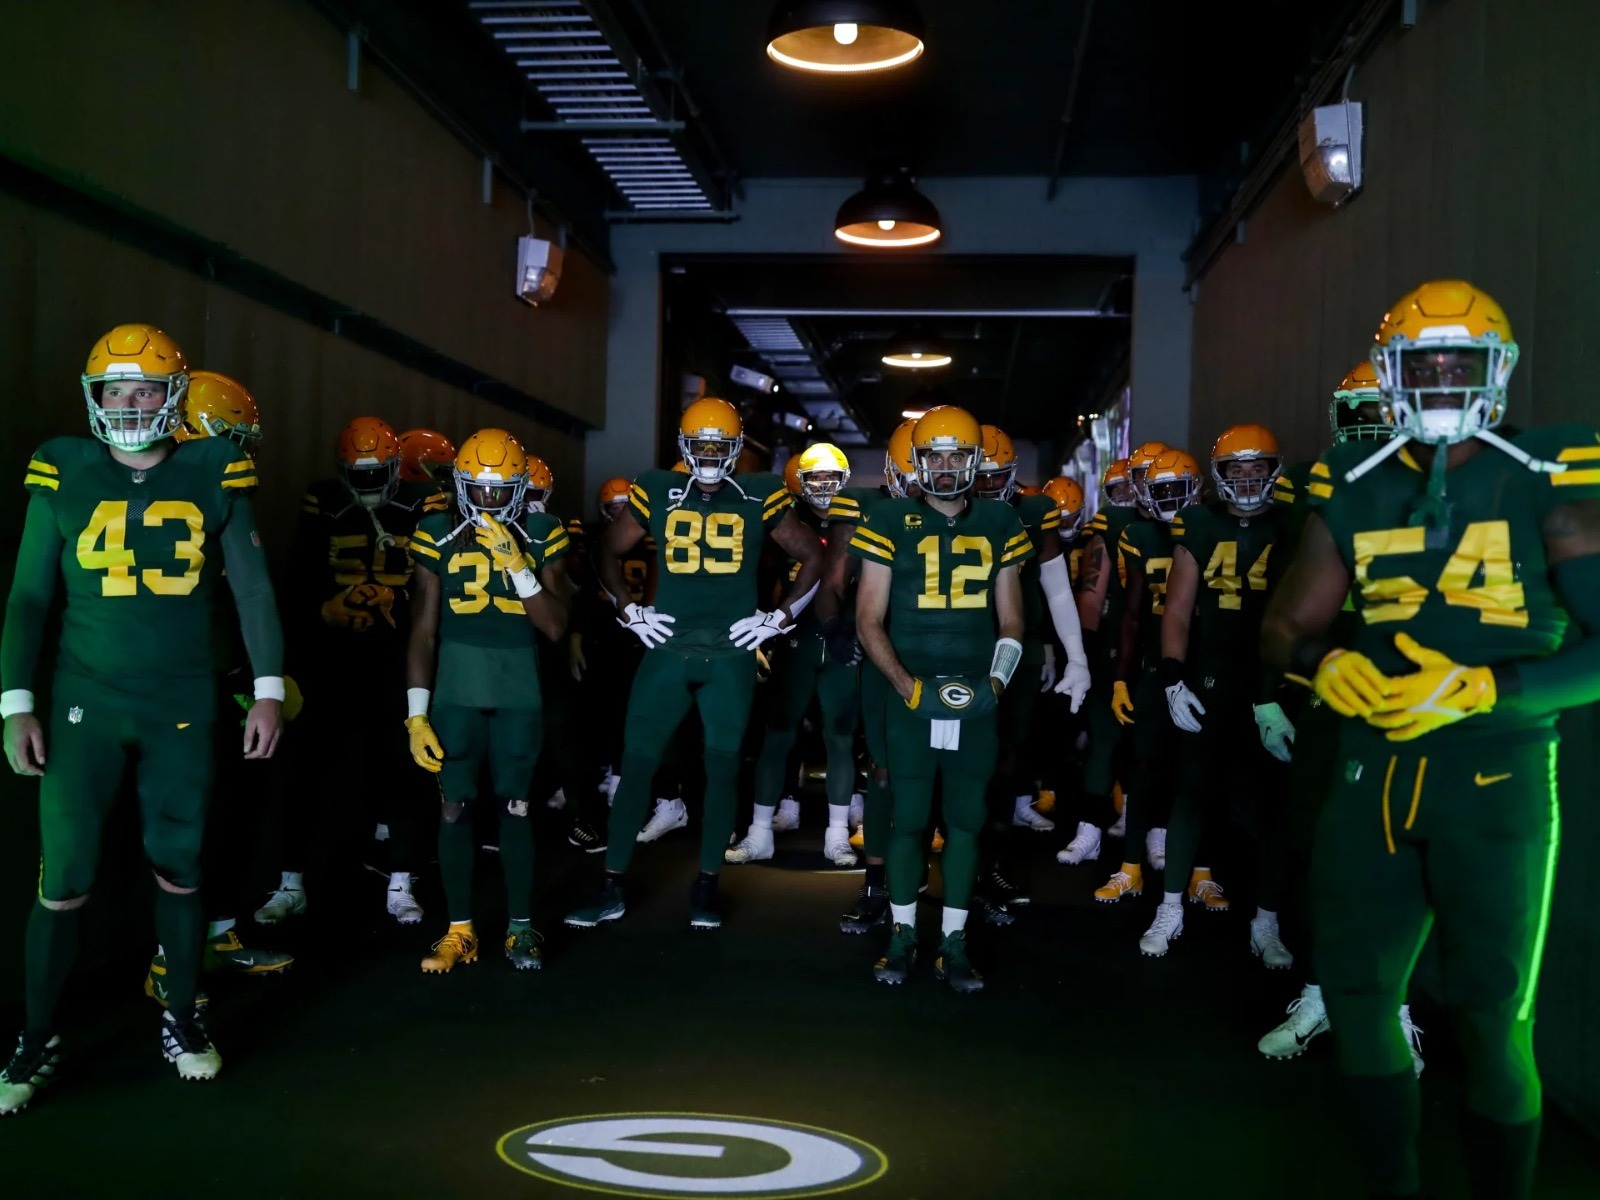 Packers 2021 alternate jerseys made for some great photos - Packernet's View